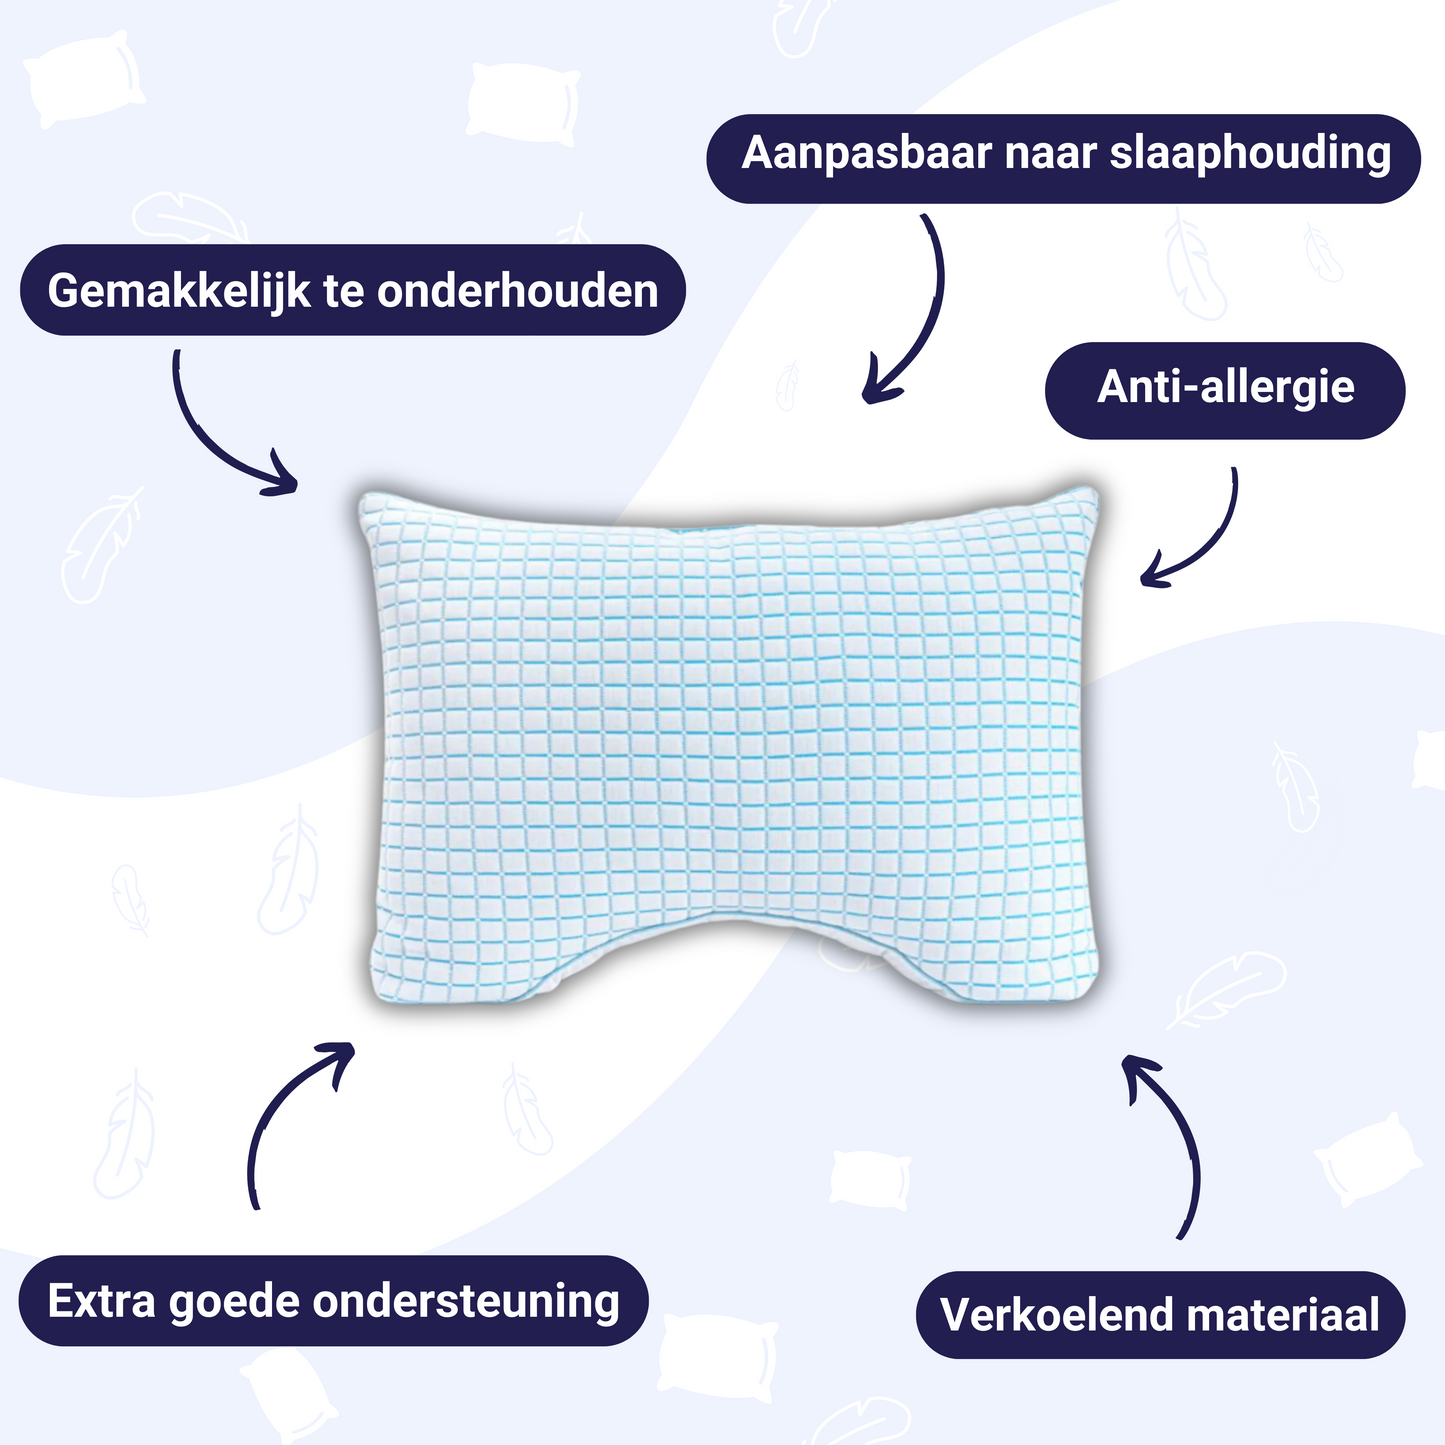 Wonderpillow Premium Microgel Neck Support Cooling